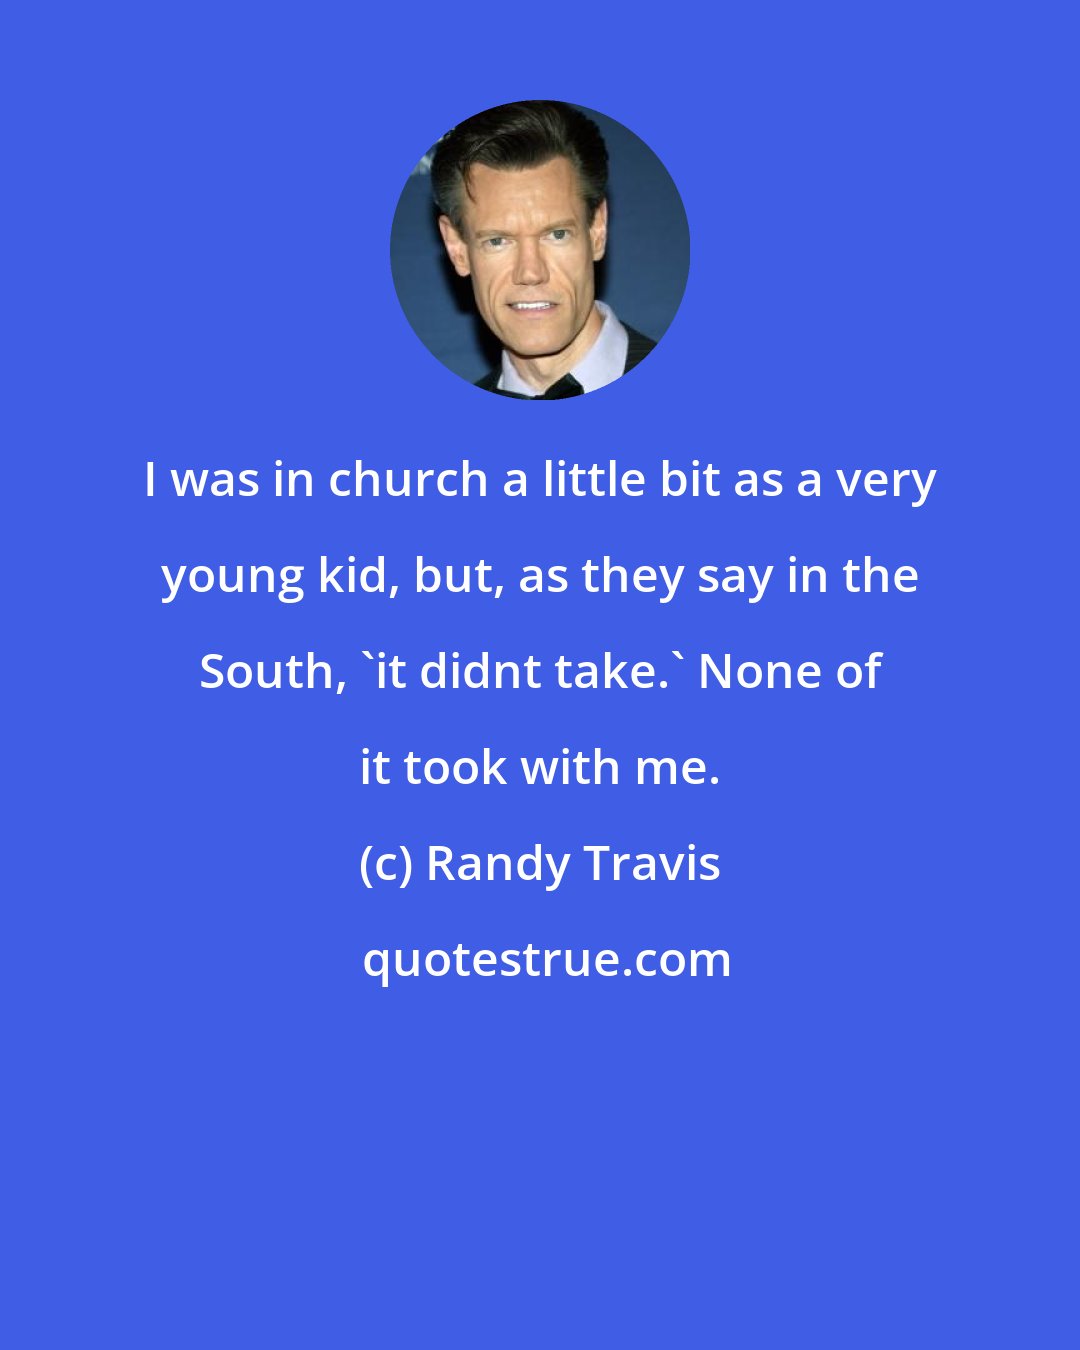 Randy Travis: I was in church a little bit as a very young kid, but, as they say in the South, 'it didnt take.' None of it took with me.